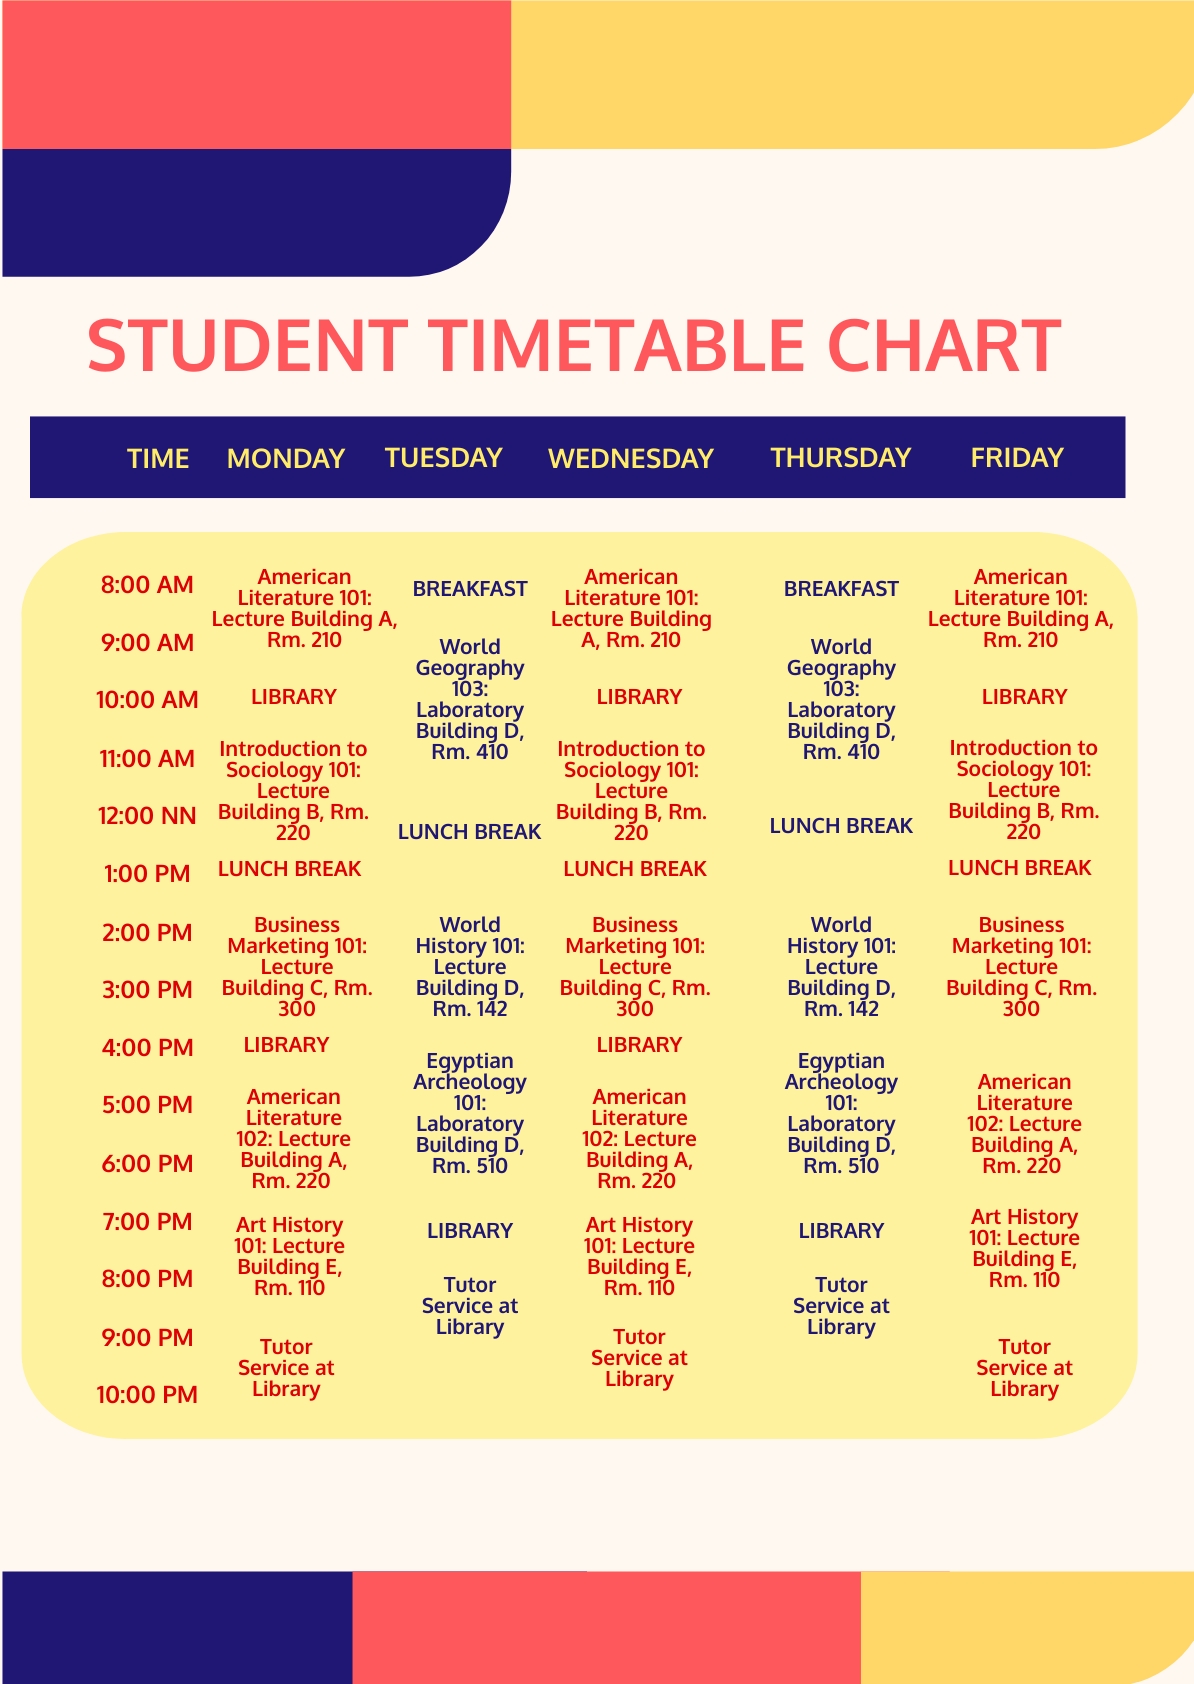 free-student-chart-template-download-in-pdf-illustrator-photoshop